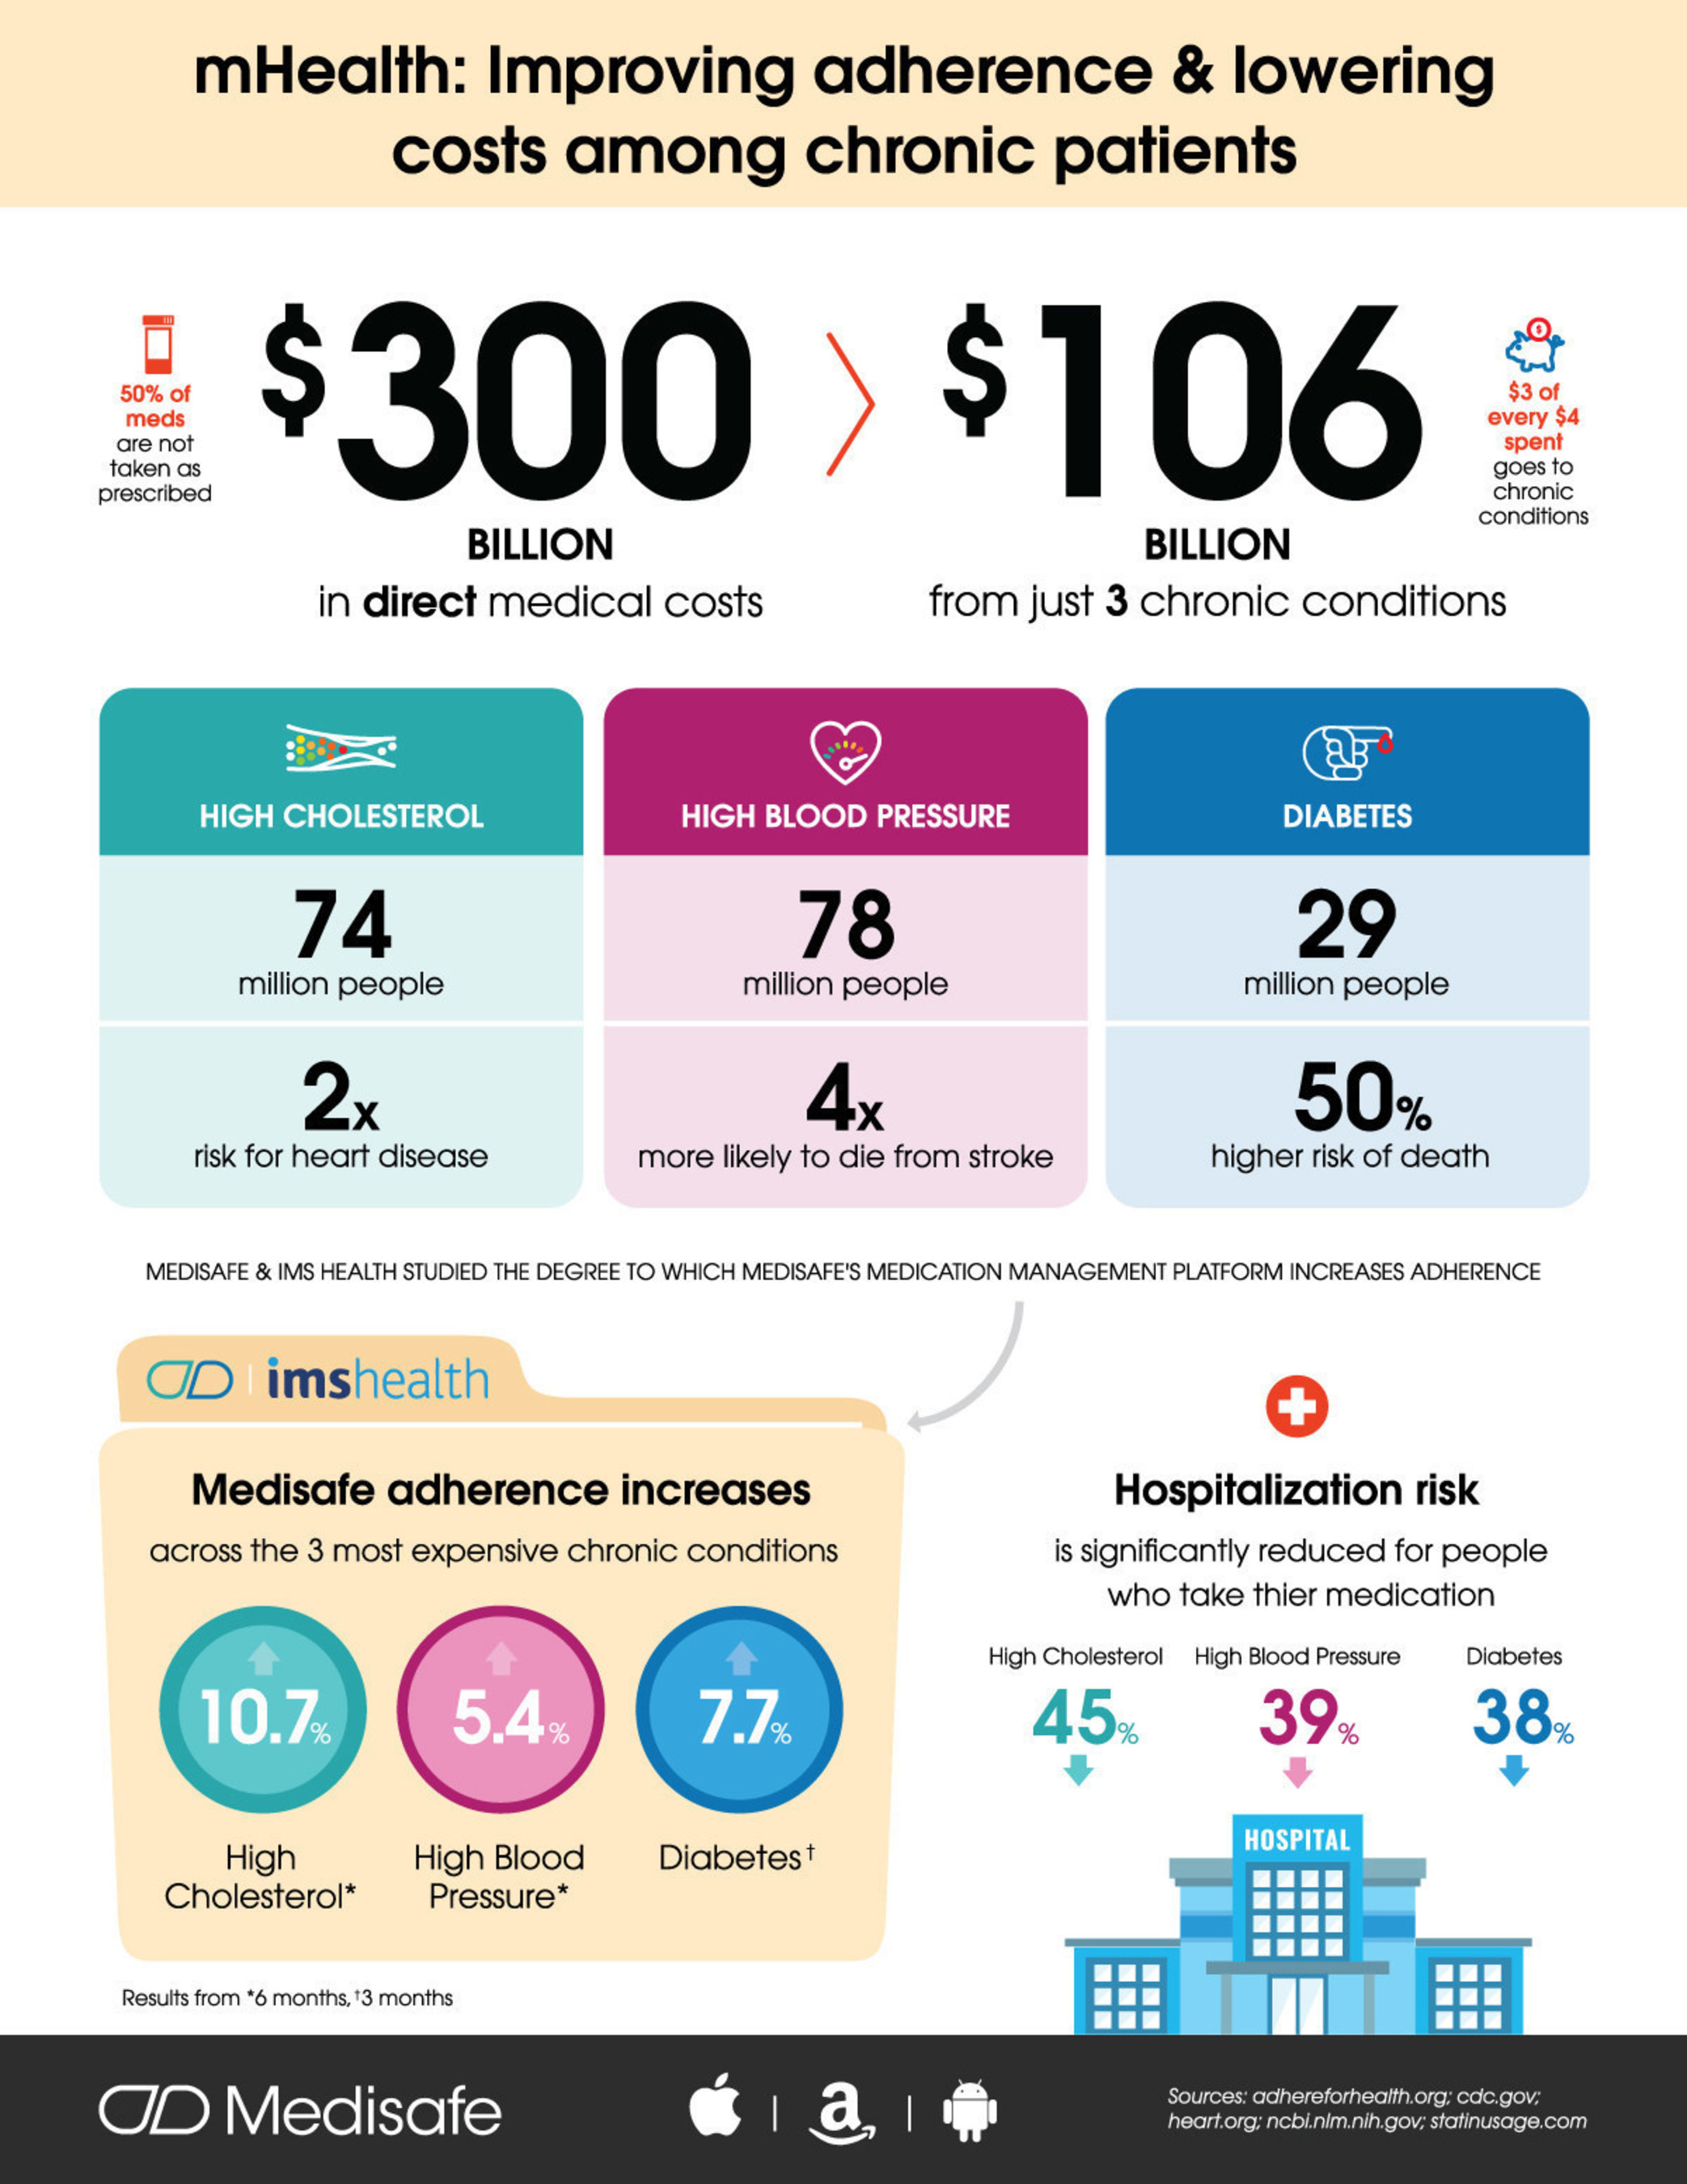 Infographic - mHealth: Improving adherence & lowering costs among chronic patients